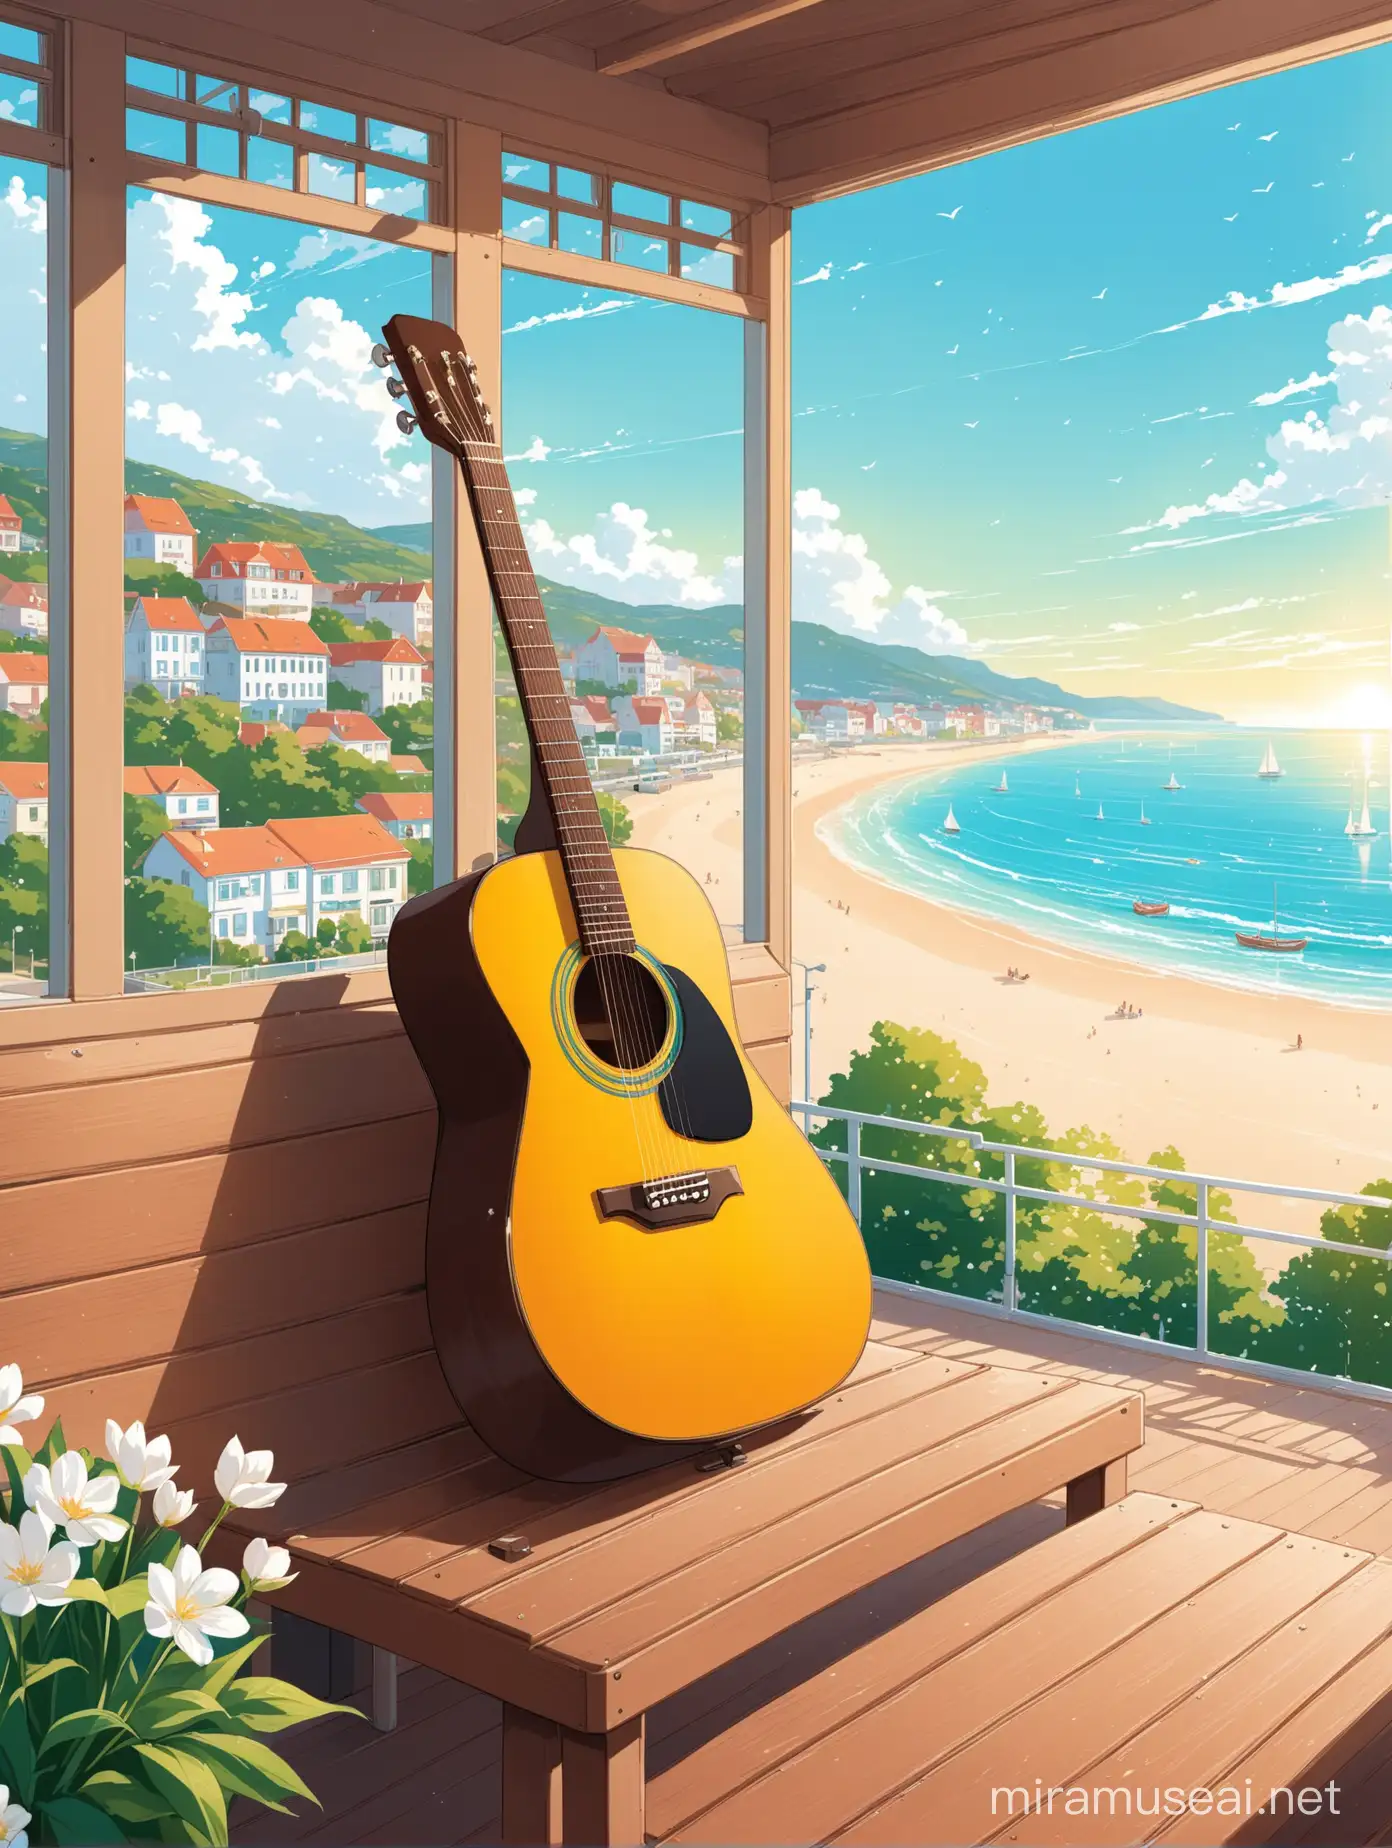 poster of a springtime guitar concert at music school, seaside town in the background, with no titles or any writings